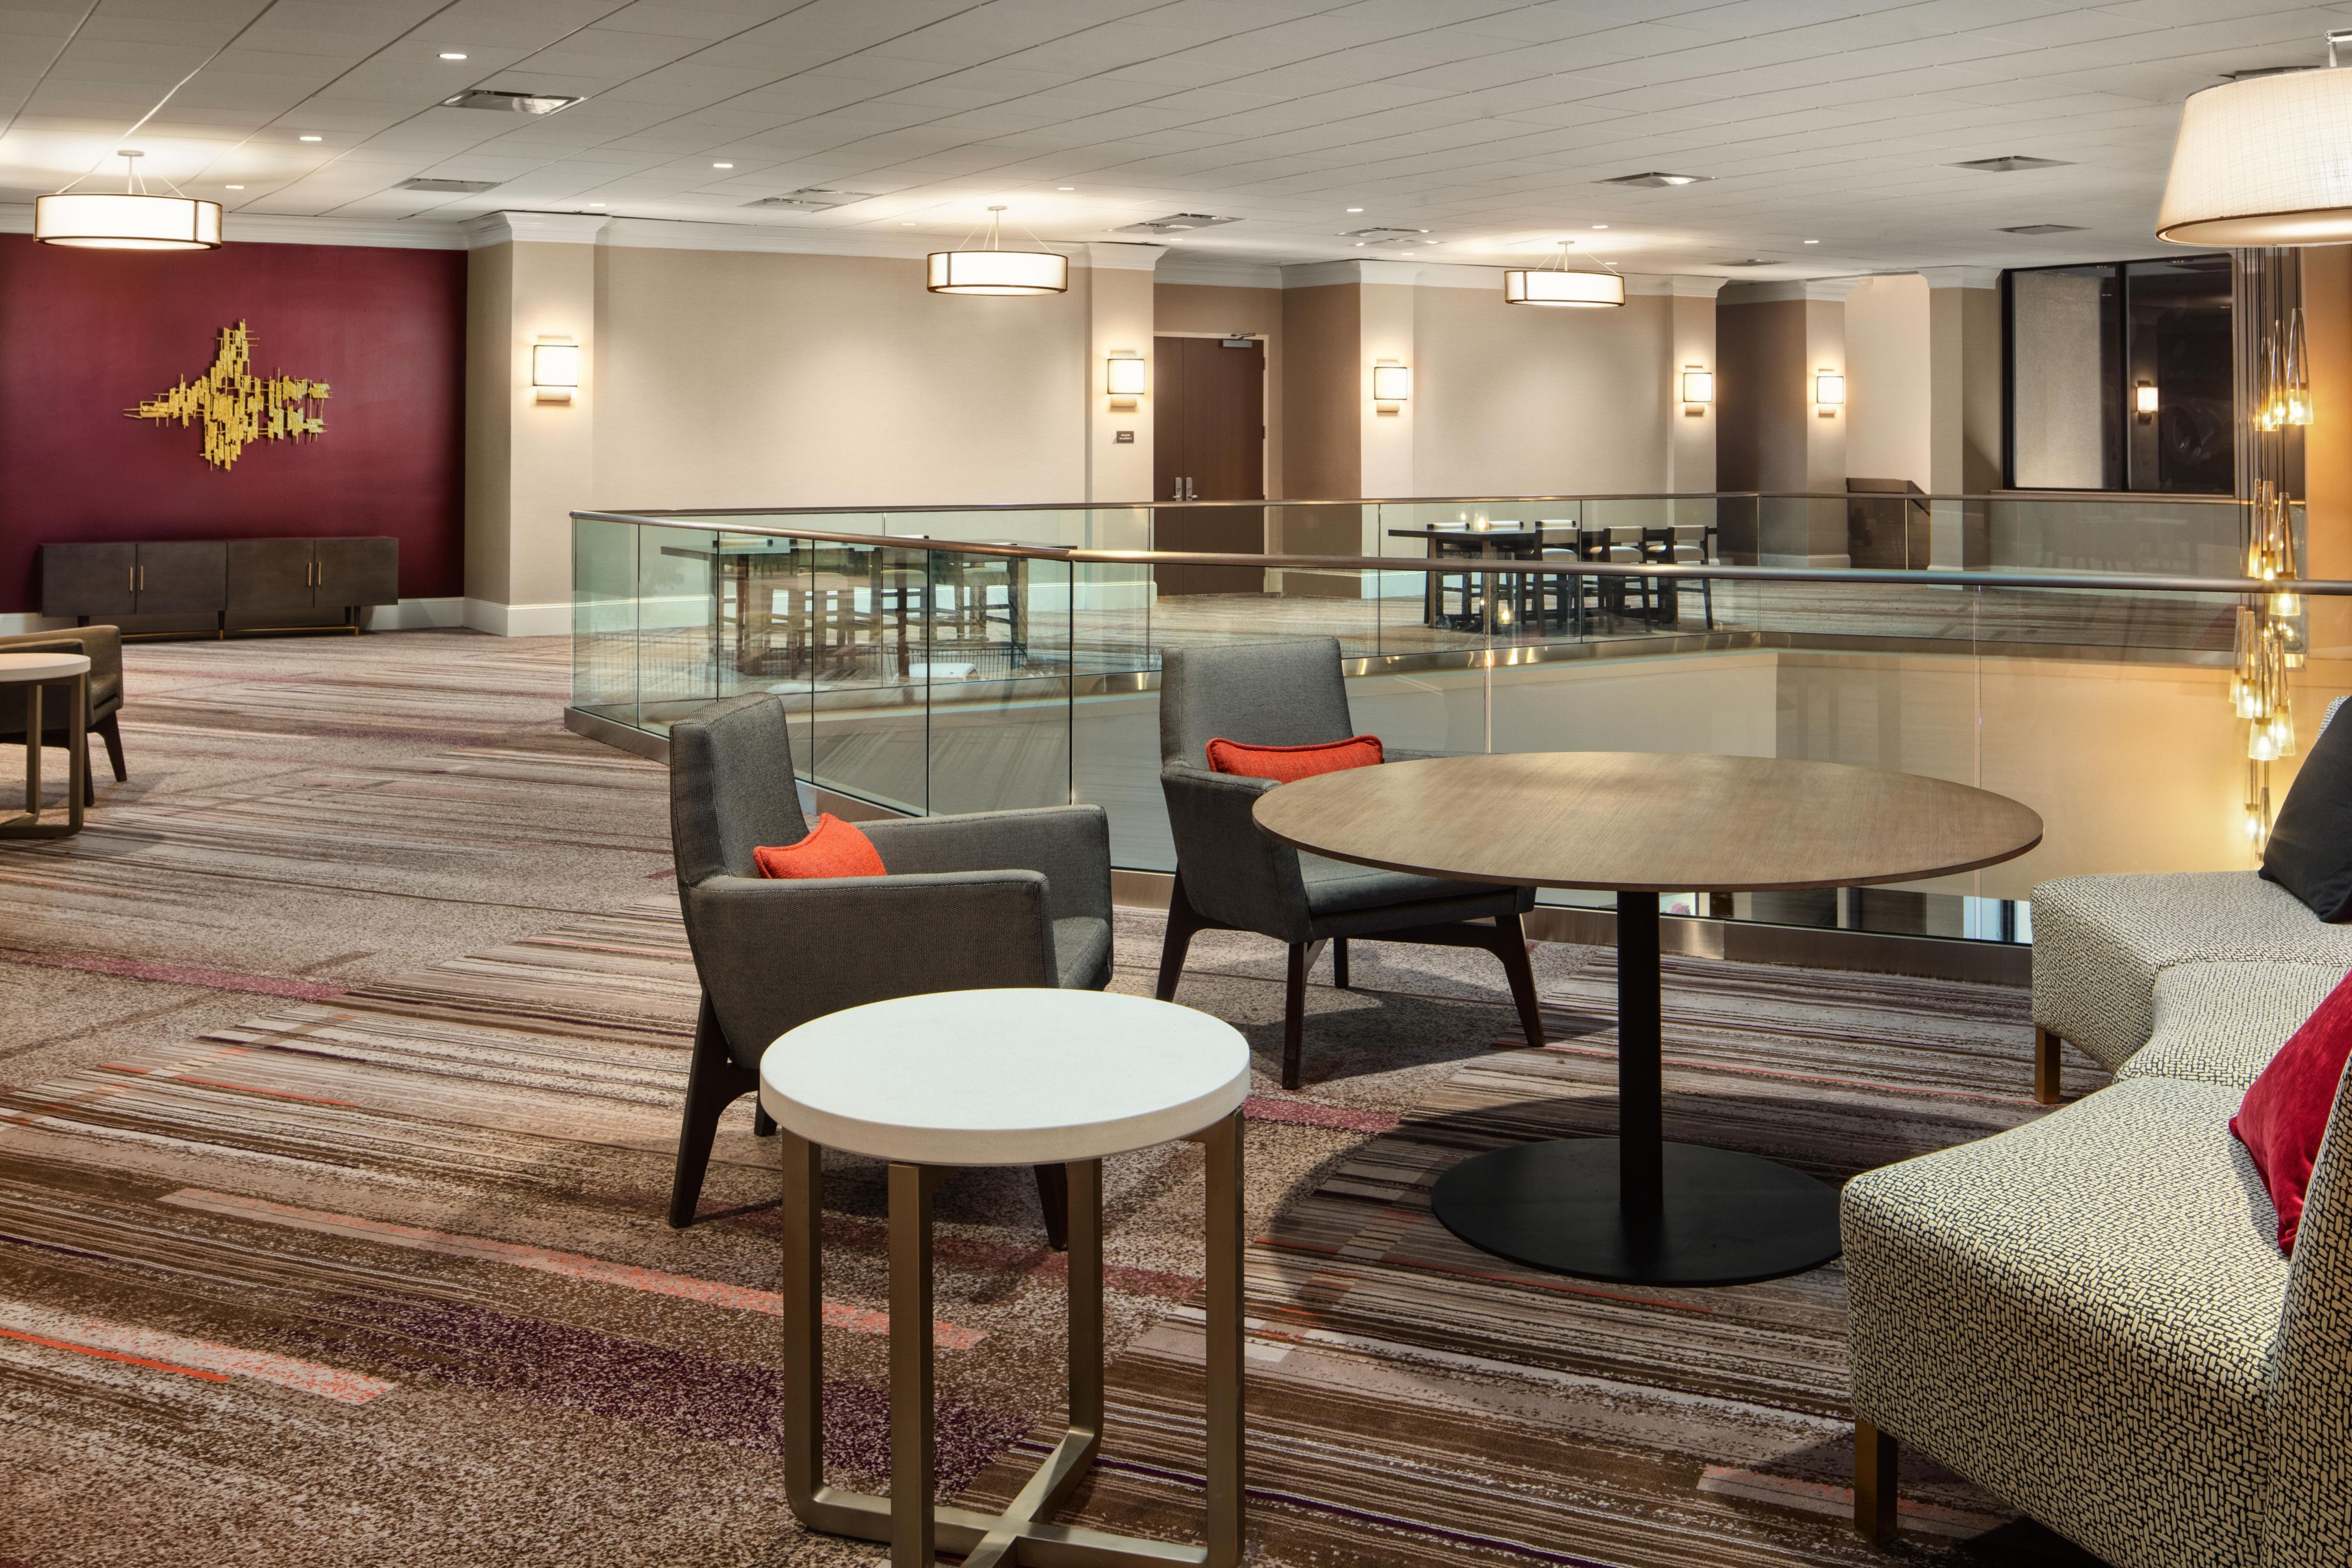 Guests can do registration or coffee breaks in our elegant foyer.